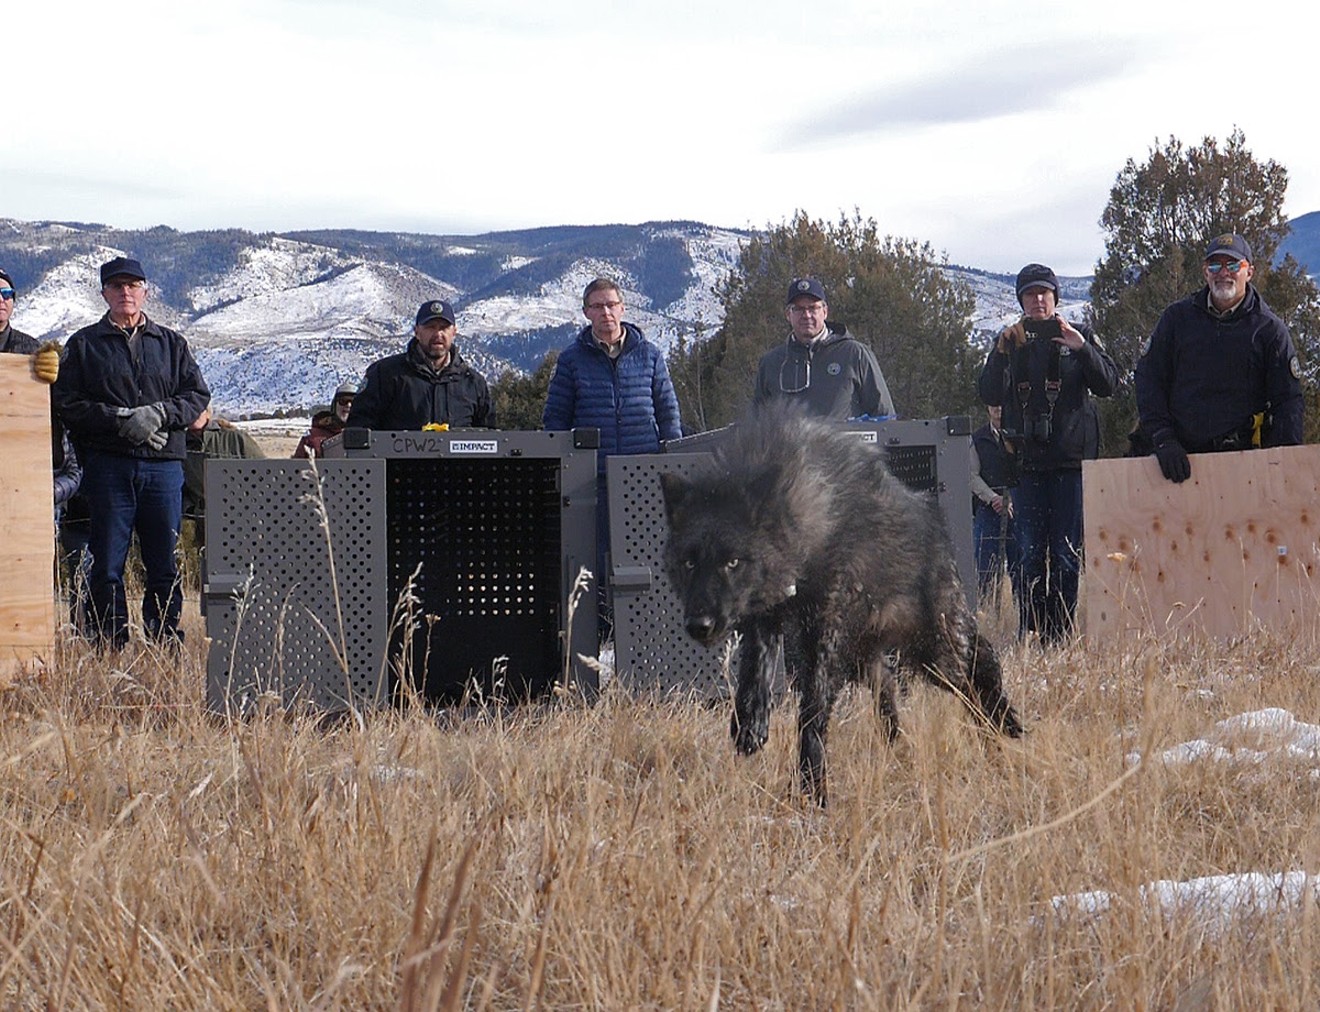 Wolves are back on Colorado soil, but the topic is still controversial